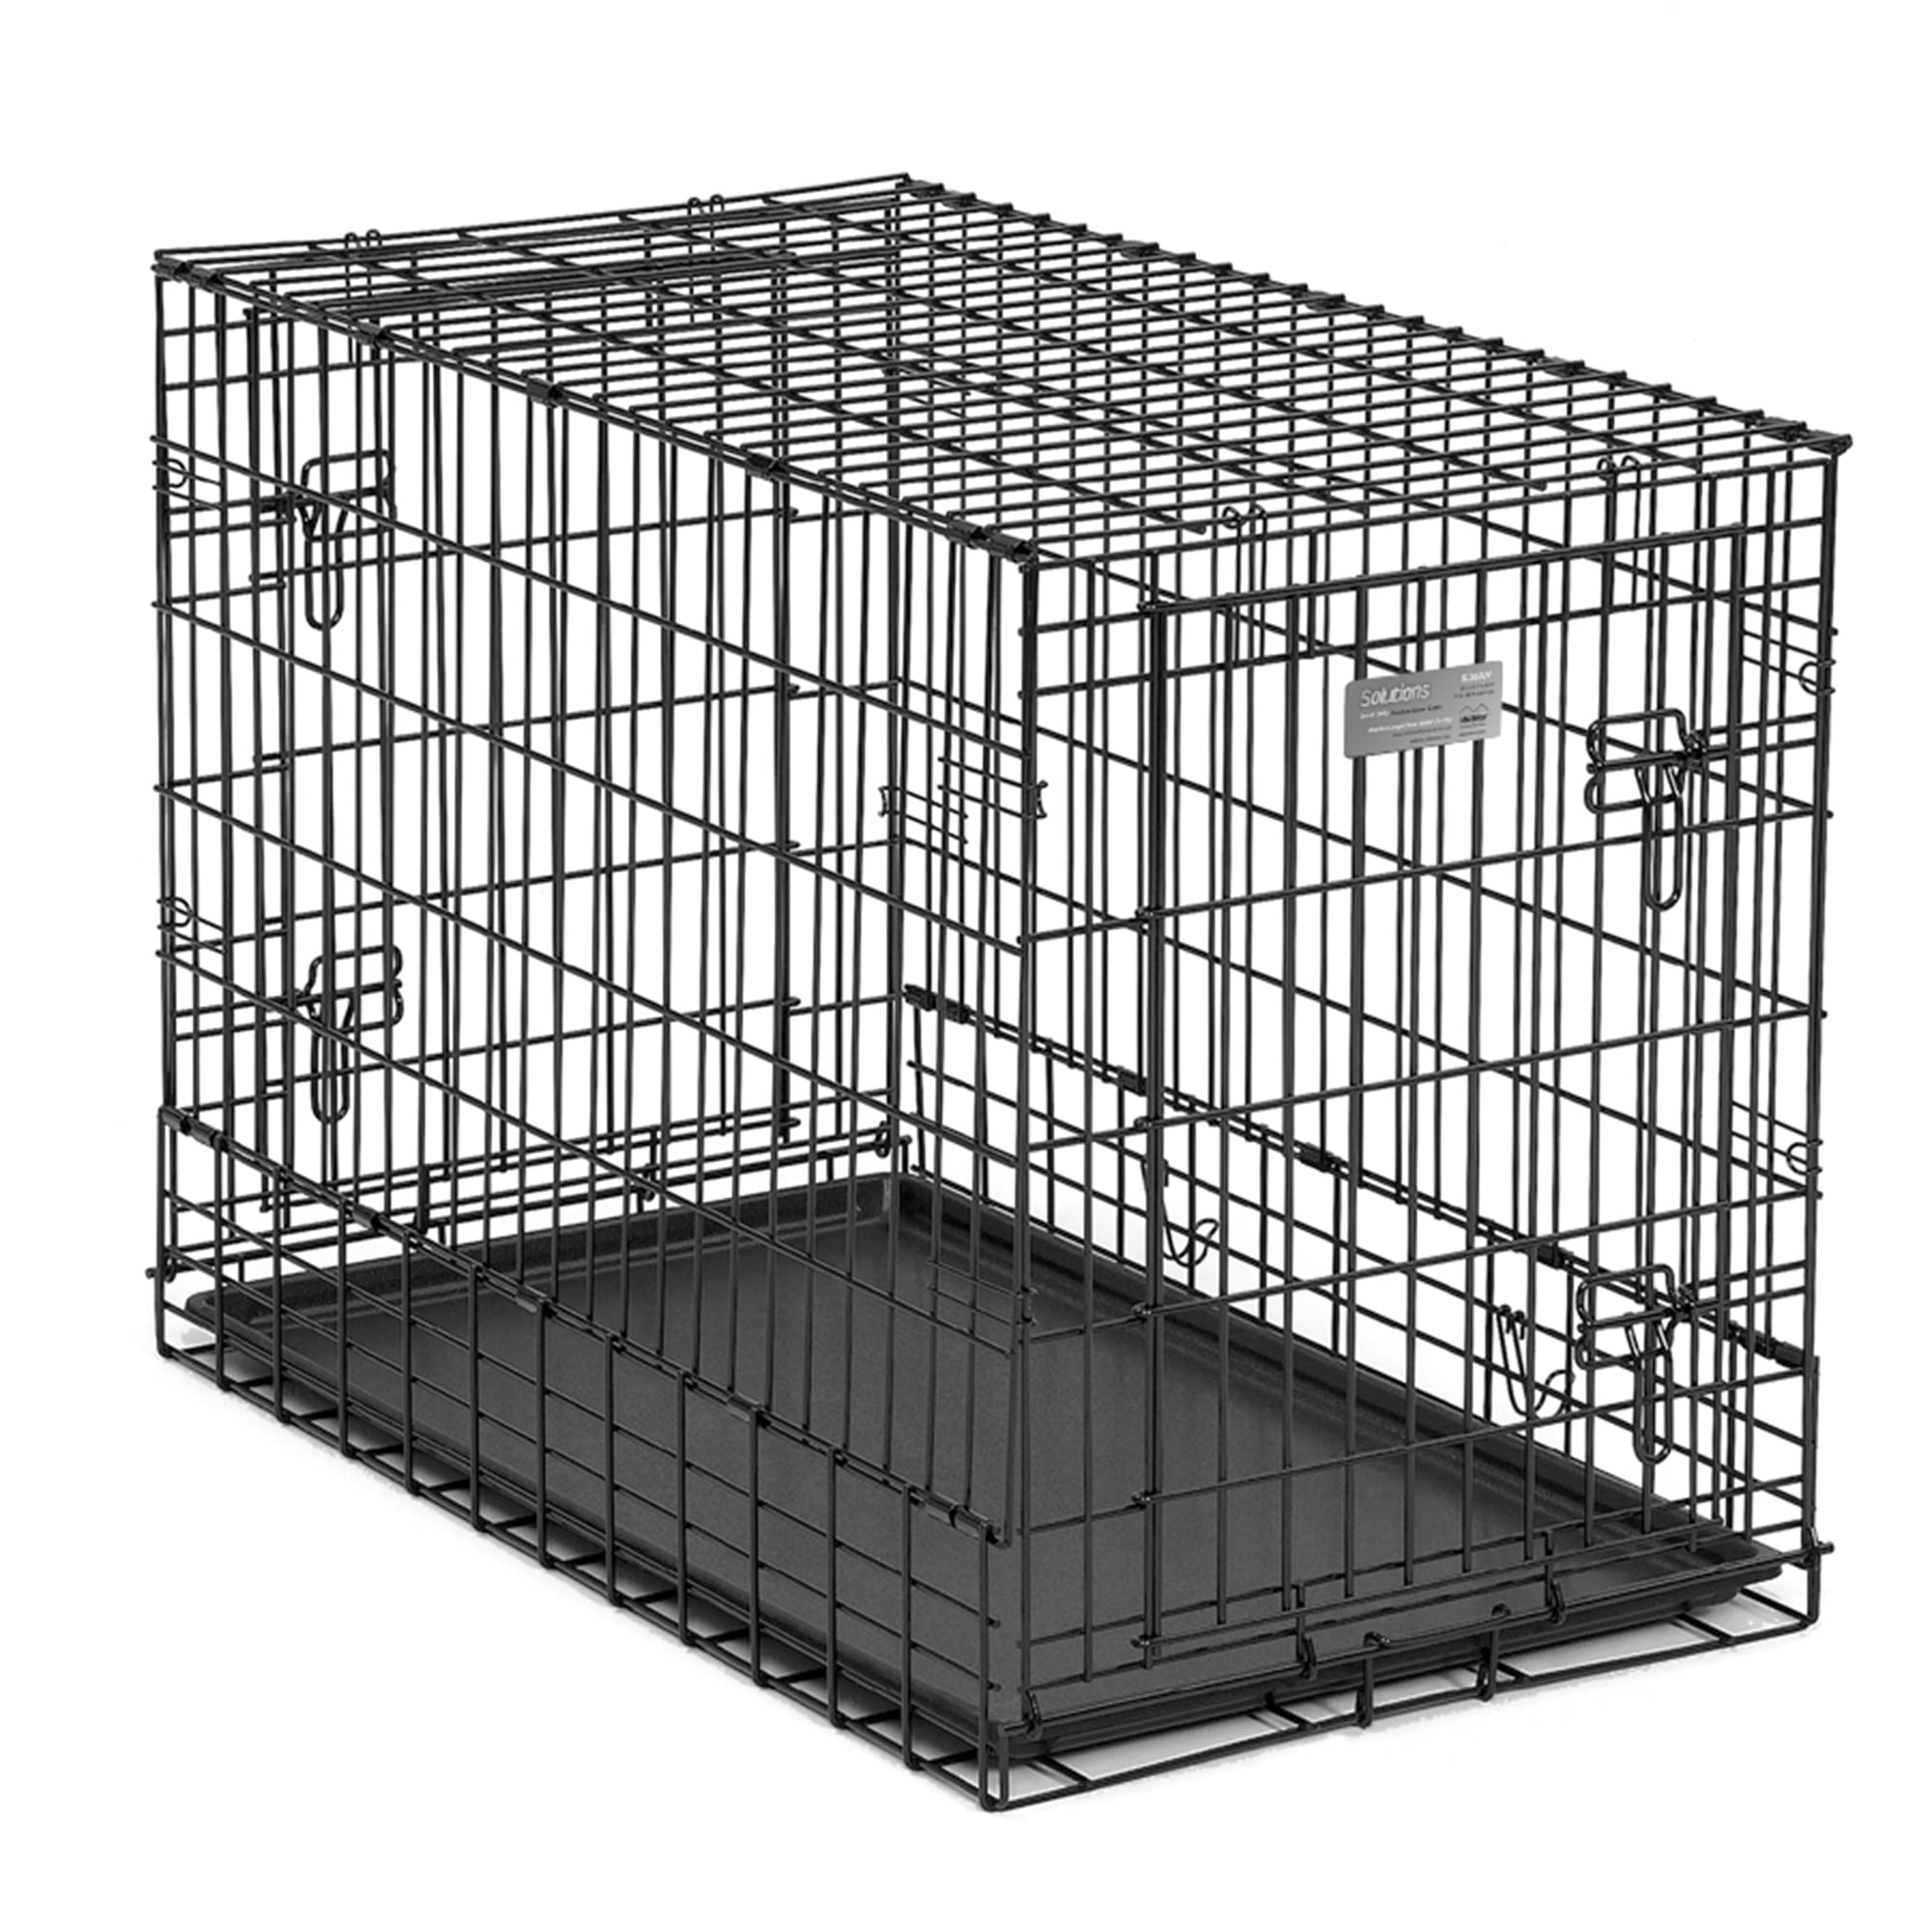 Photos - Dog Kennel Midwest Solution Series Side-by-Side Double Door SUV Dog Crate, 36 